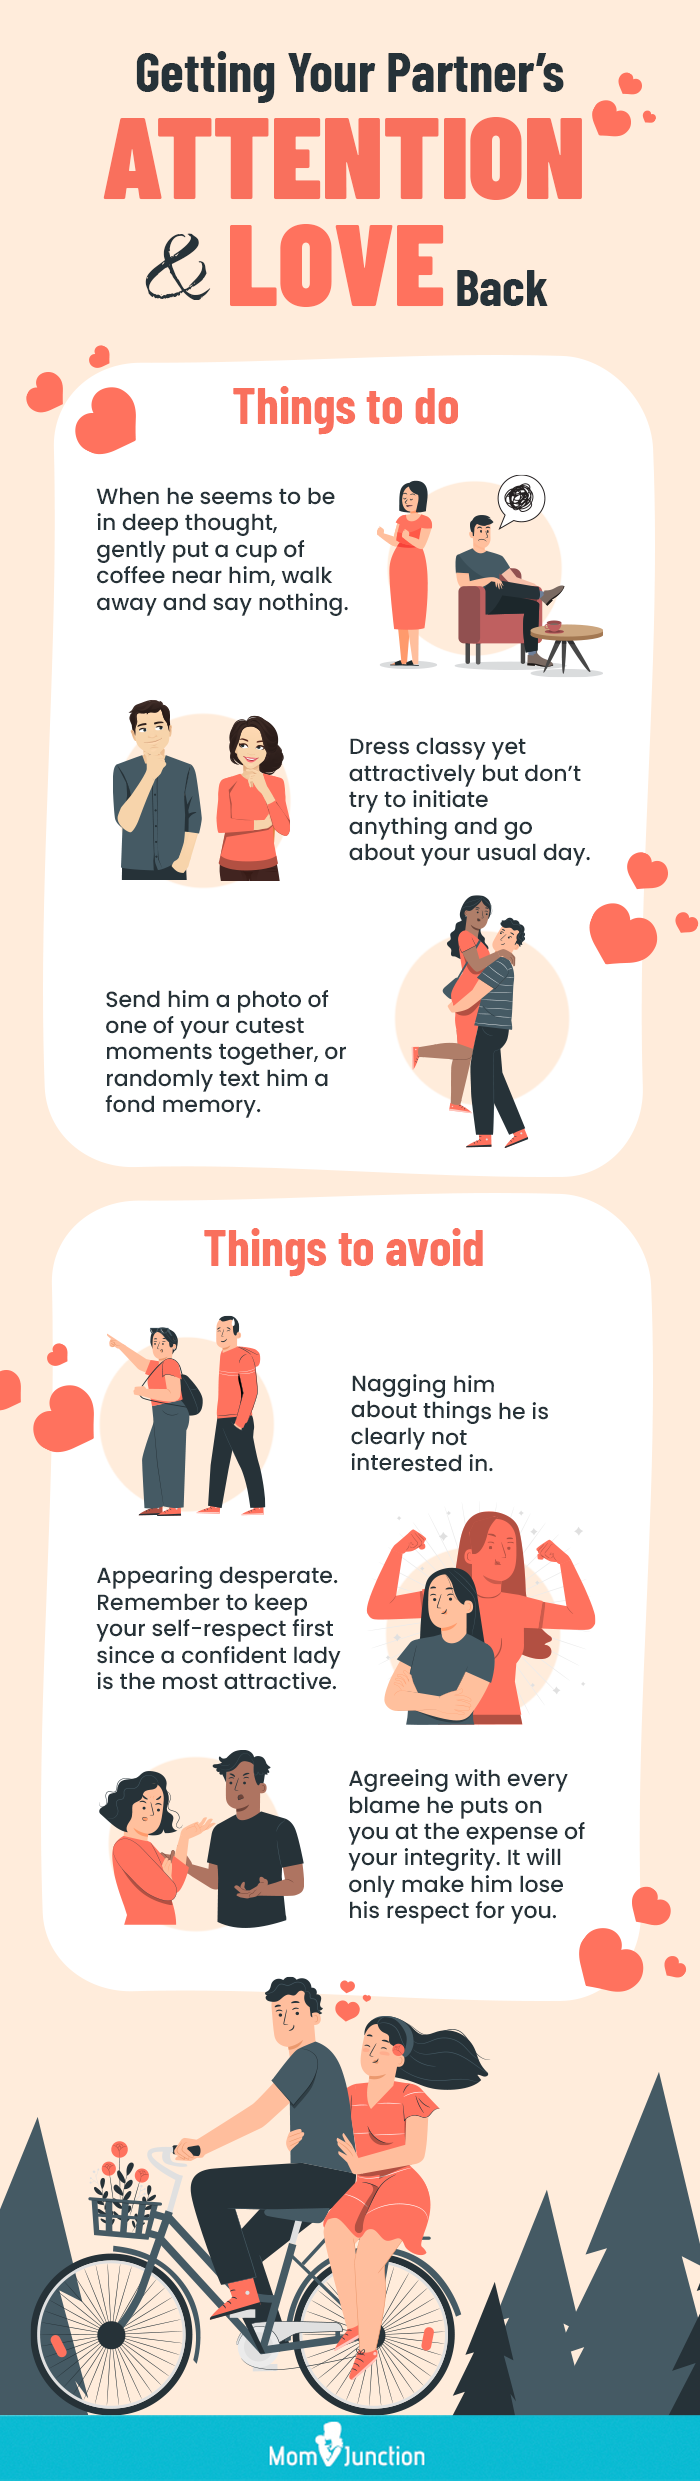 getting your partners attention and love back (infographic)